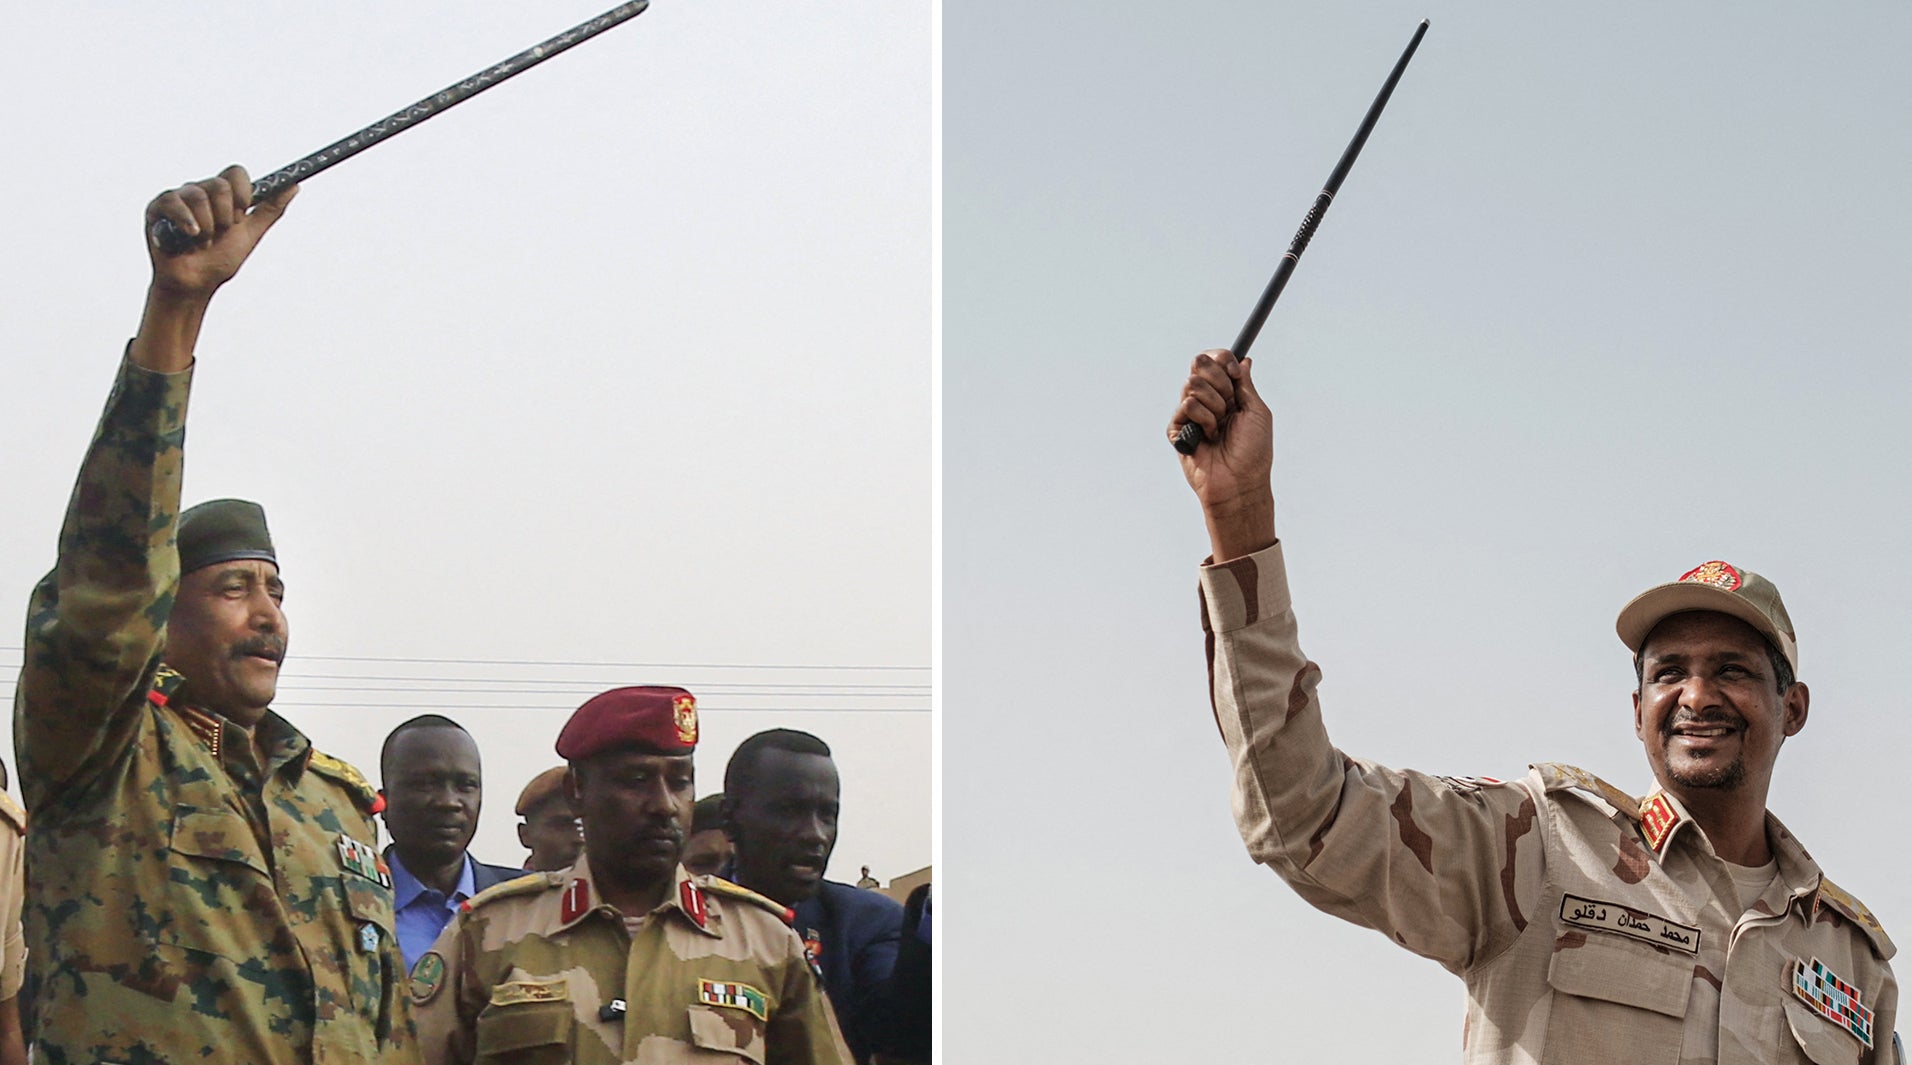 This file picture composite shows General Abdel Fattah al-Burhan (L), the head of Sudan's ruling military council, greeting his supporters in Khartoum's twin city of Omdurman on June 29, 2019 and Sudanese paramilitary commander Mohamed Hamdan Daglo raising up a cane during a meeting with his supporters in Khartoum on June 18, 2019. - Sixteen months since Sudan's top generals ousted a transition to civilian rule, the coup leaders are embroiled in a dangerous power struggle with deepening rivalries within the security forces, analysts warned on April 16, 2023. (Photo by Yasuyoshi CHIBA and Ashraf SHAZLY / AFP) (Photo by YASUYOSHI CHIBA,ASHRAF SHAZLY/AFP via Getty Images)